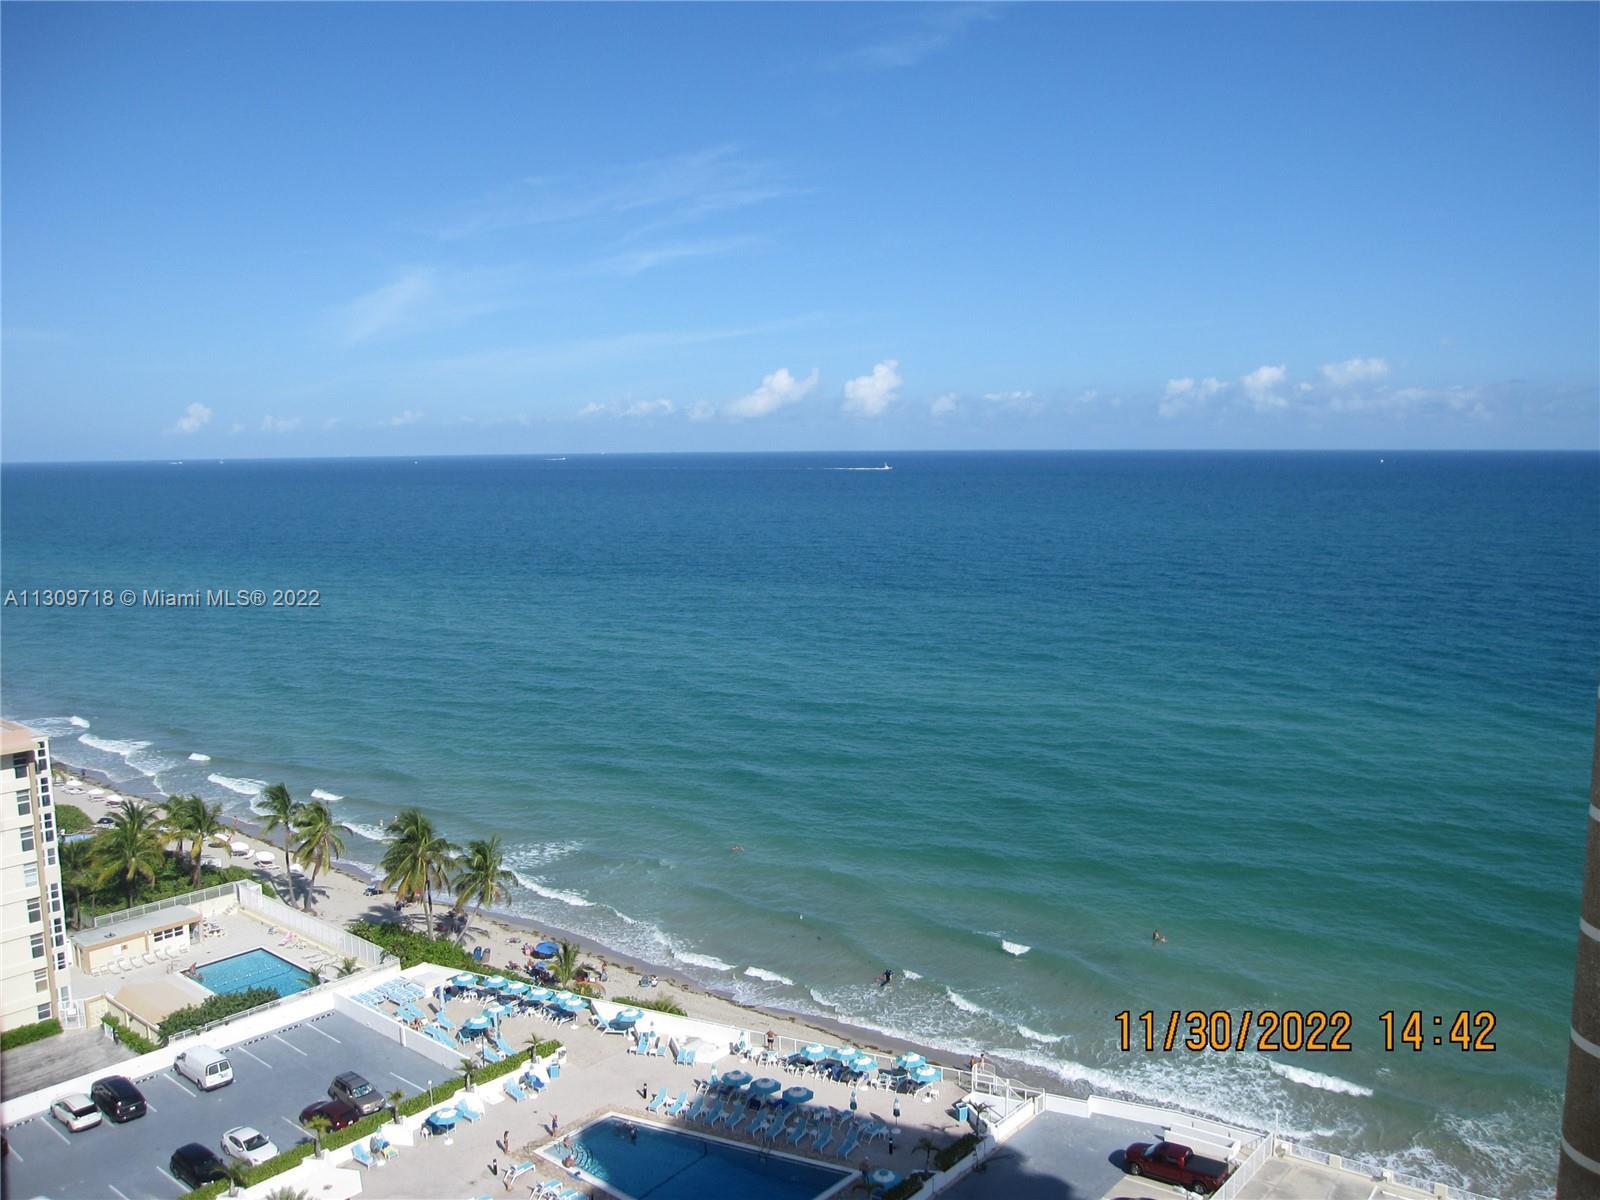 ***LOCATION***LOCATION*** LIVE NEXT TO GOLDEN BEACH! 
ENJOY GLORIOUS SUNRISES FROM THIS PENTHOUSE W